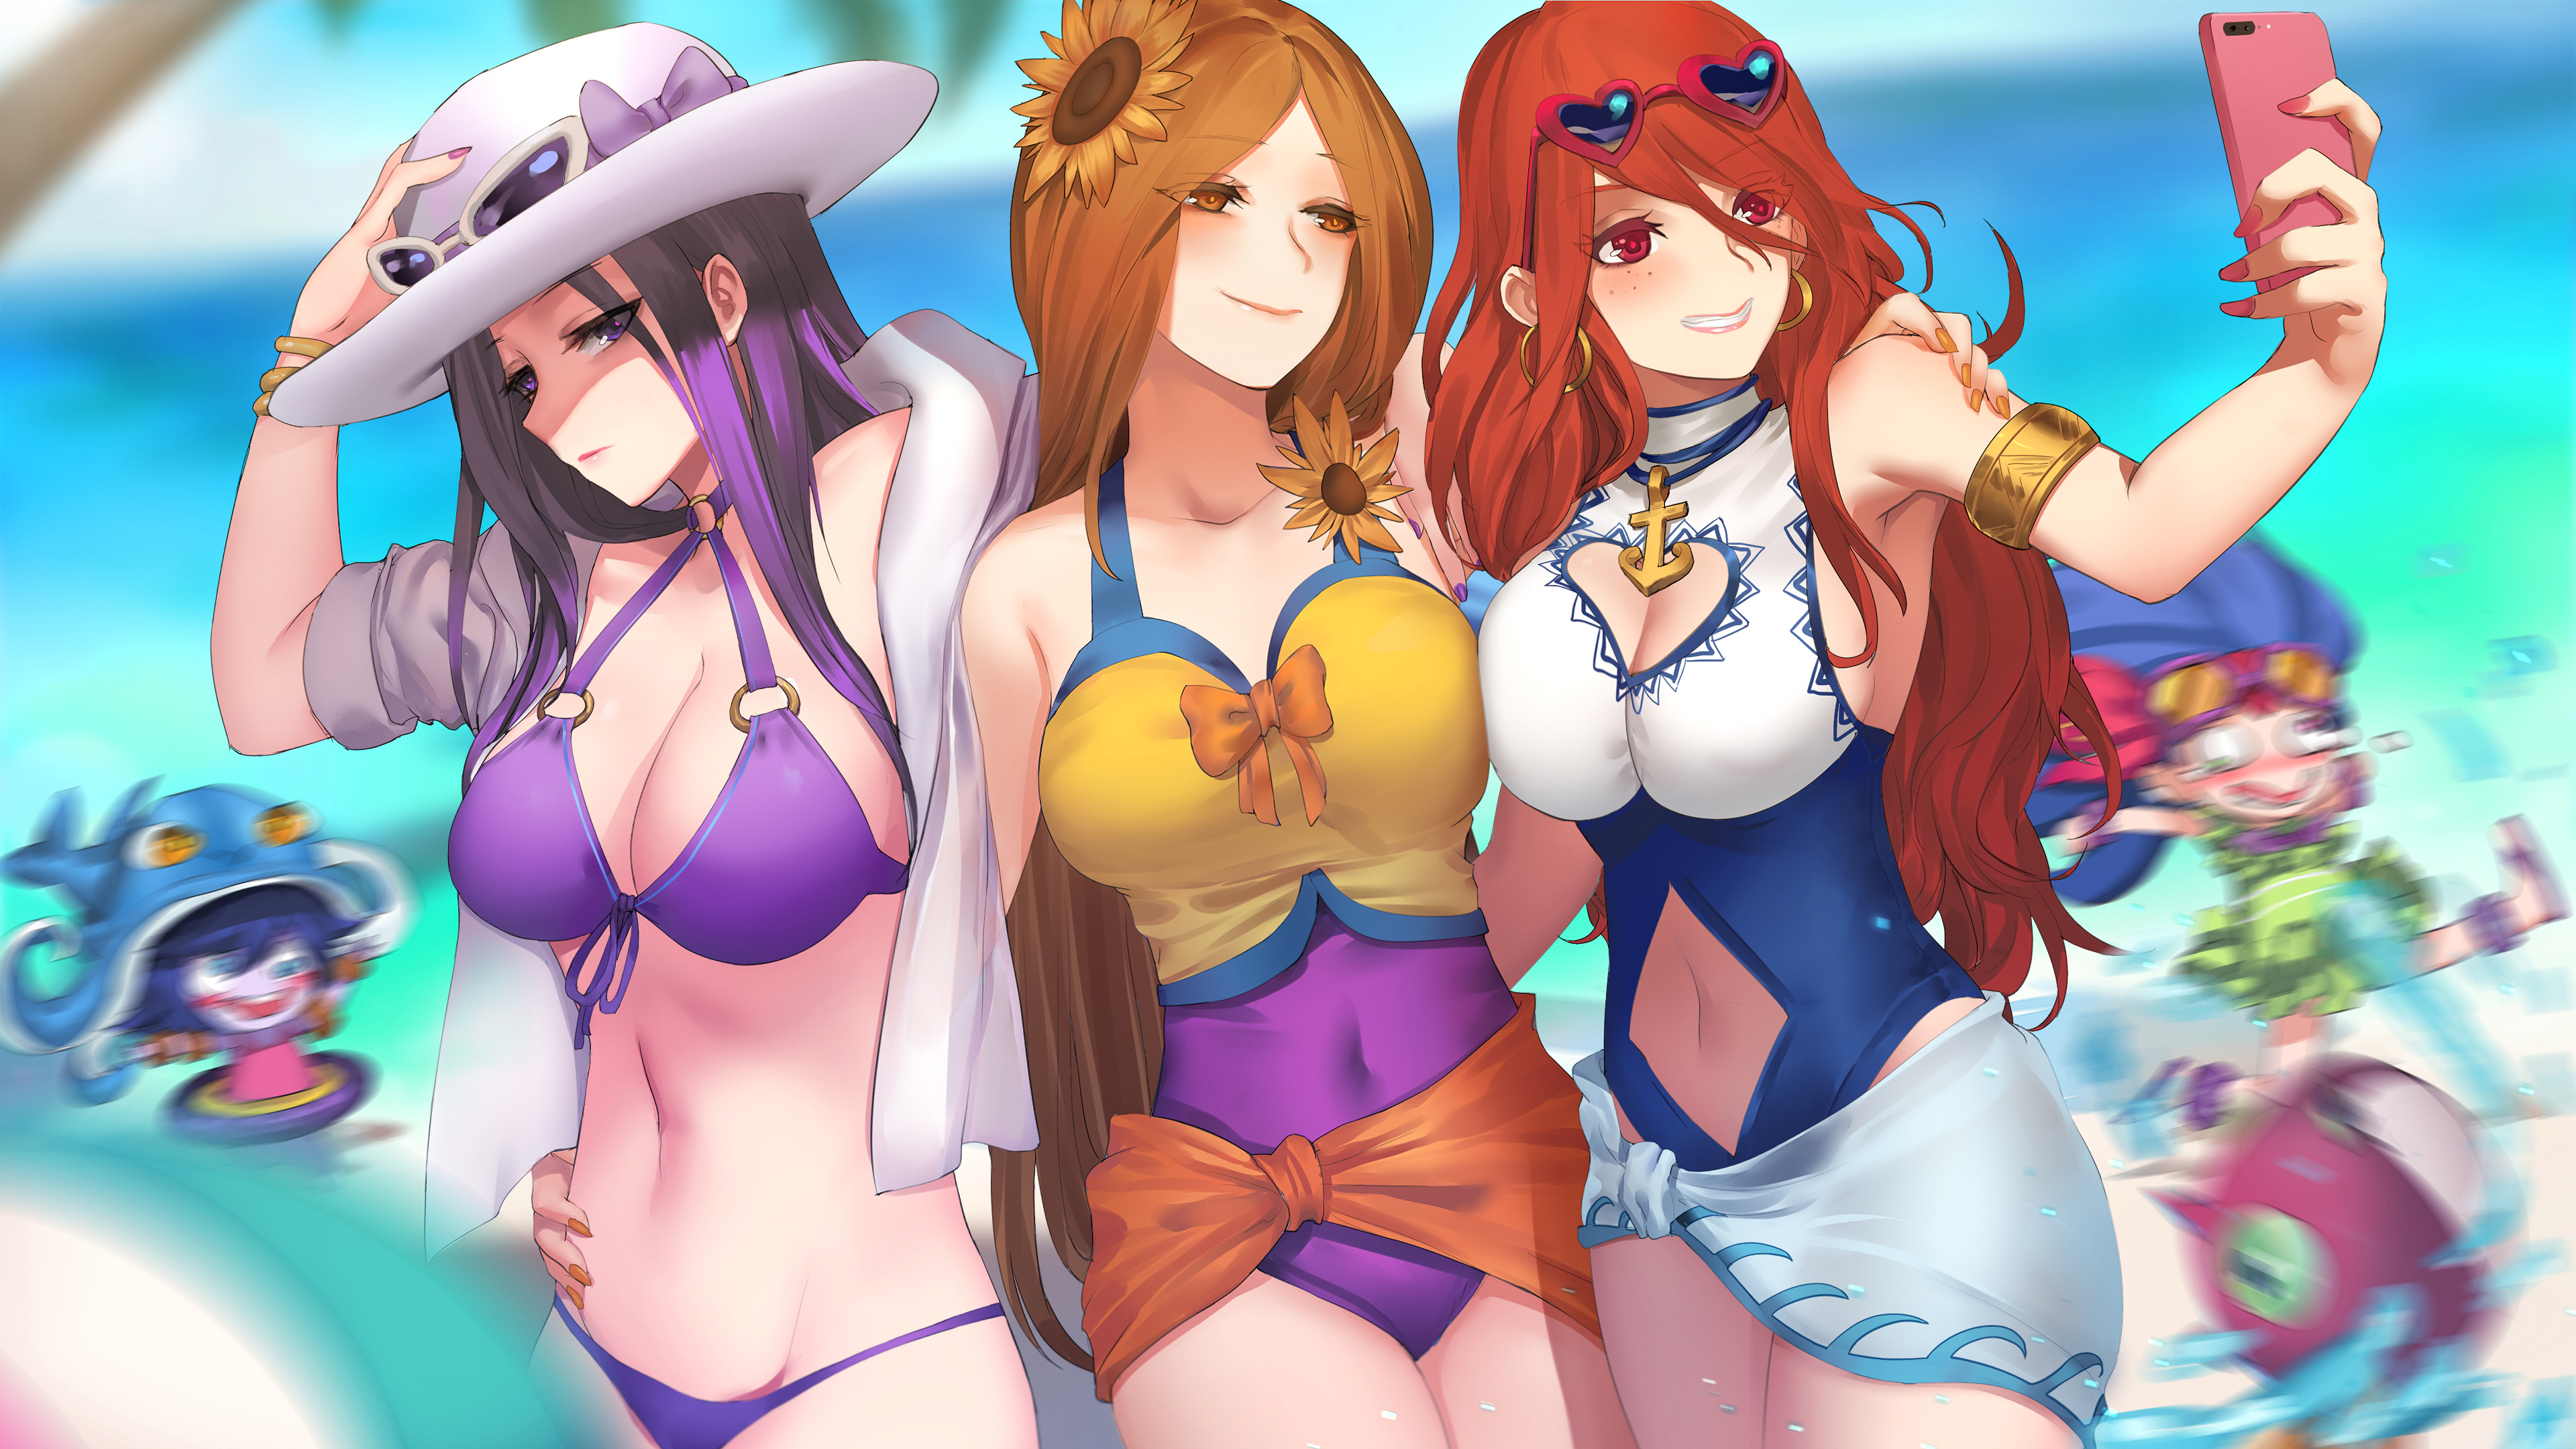 Anime 3840x2160 League of Legends video games Caitlyn (League of Legends) pool party Zoe (League of Legends) Leona (League of Legends) Miss Fortune (League of Legends) lulu Lulu (League of Legends) bikini selfies one-piece swimsuit PD (artist)